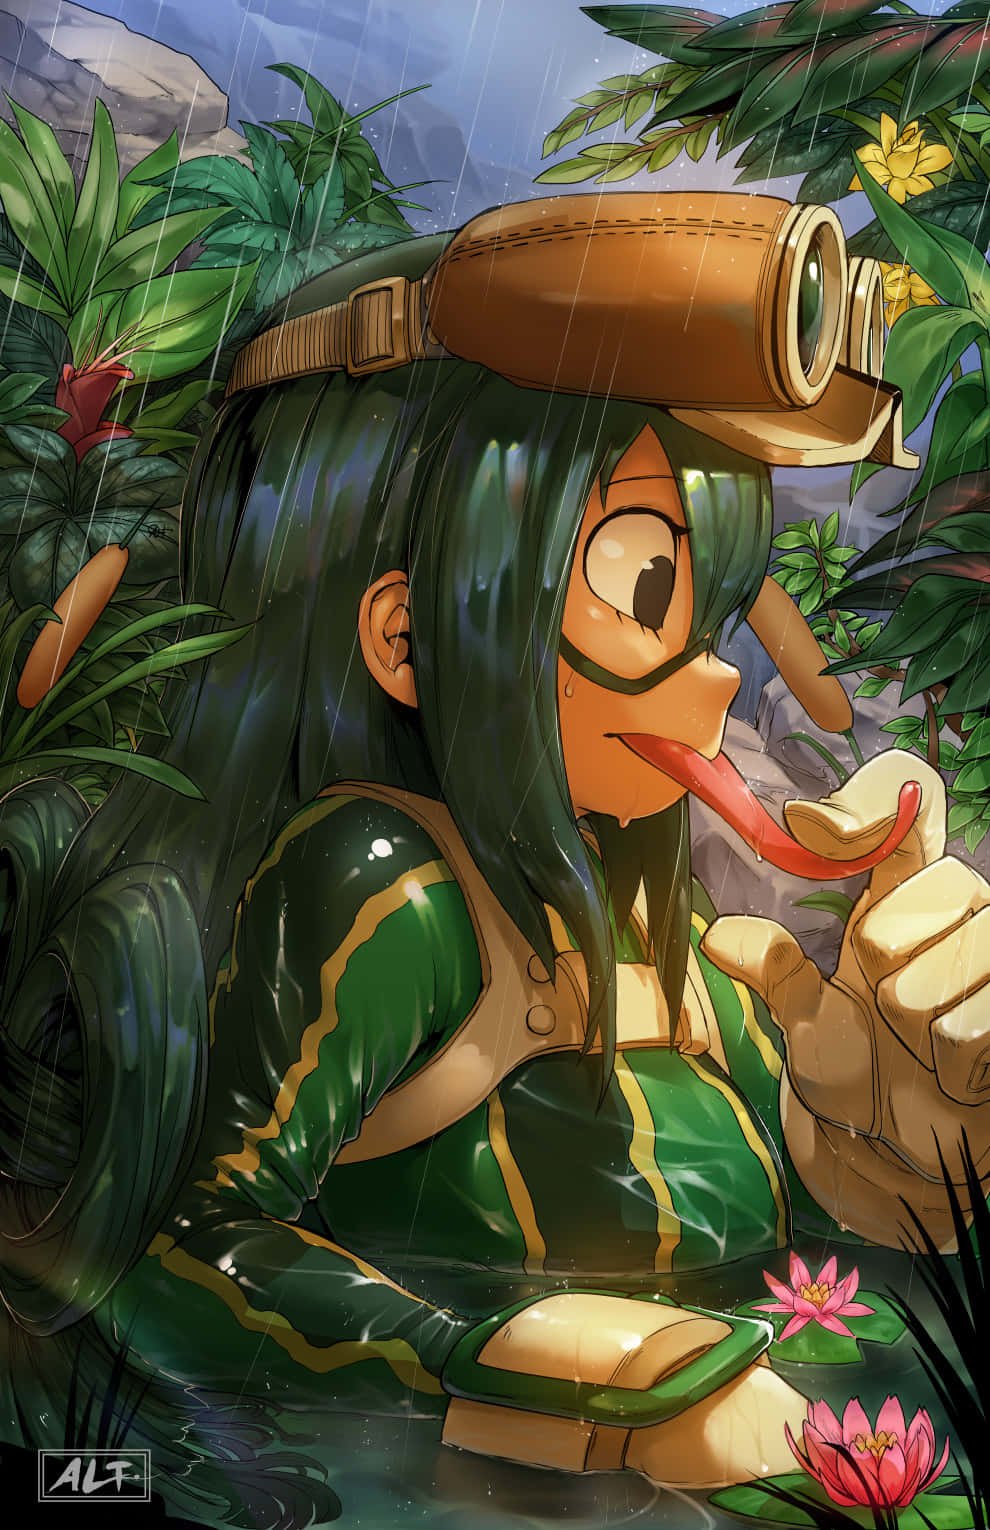 Froppy embraces the beauty of nature